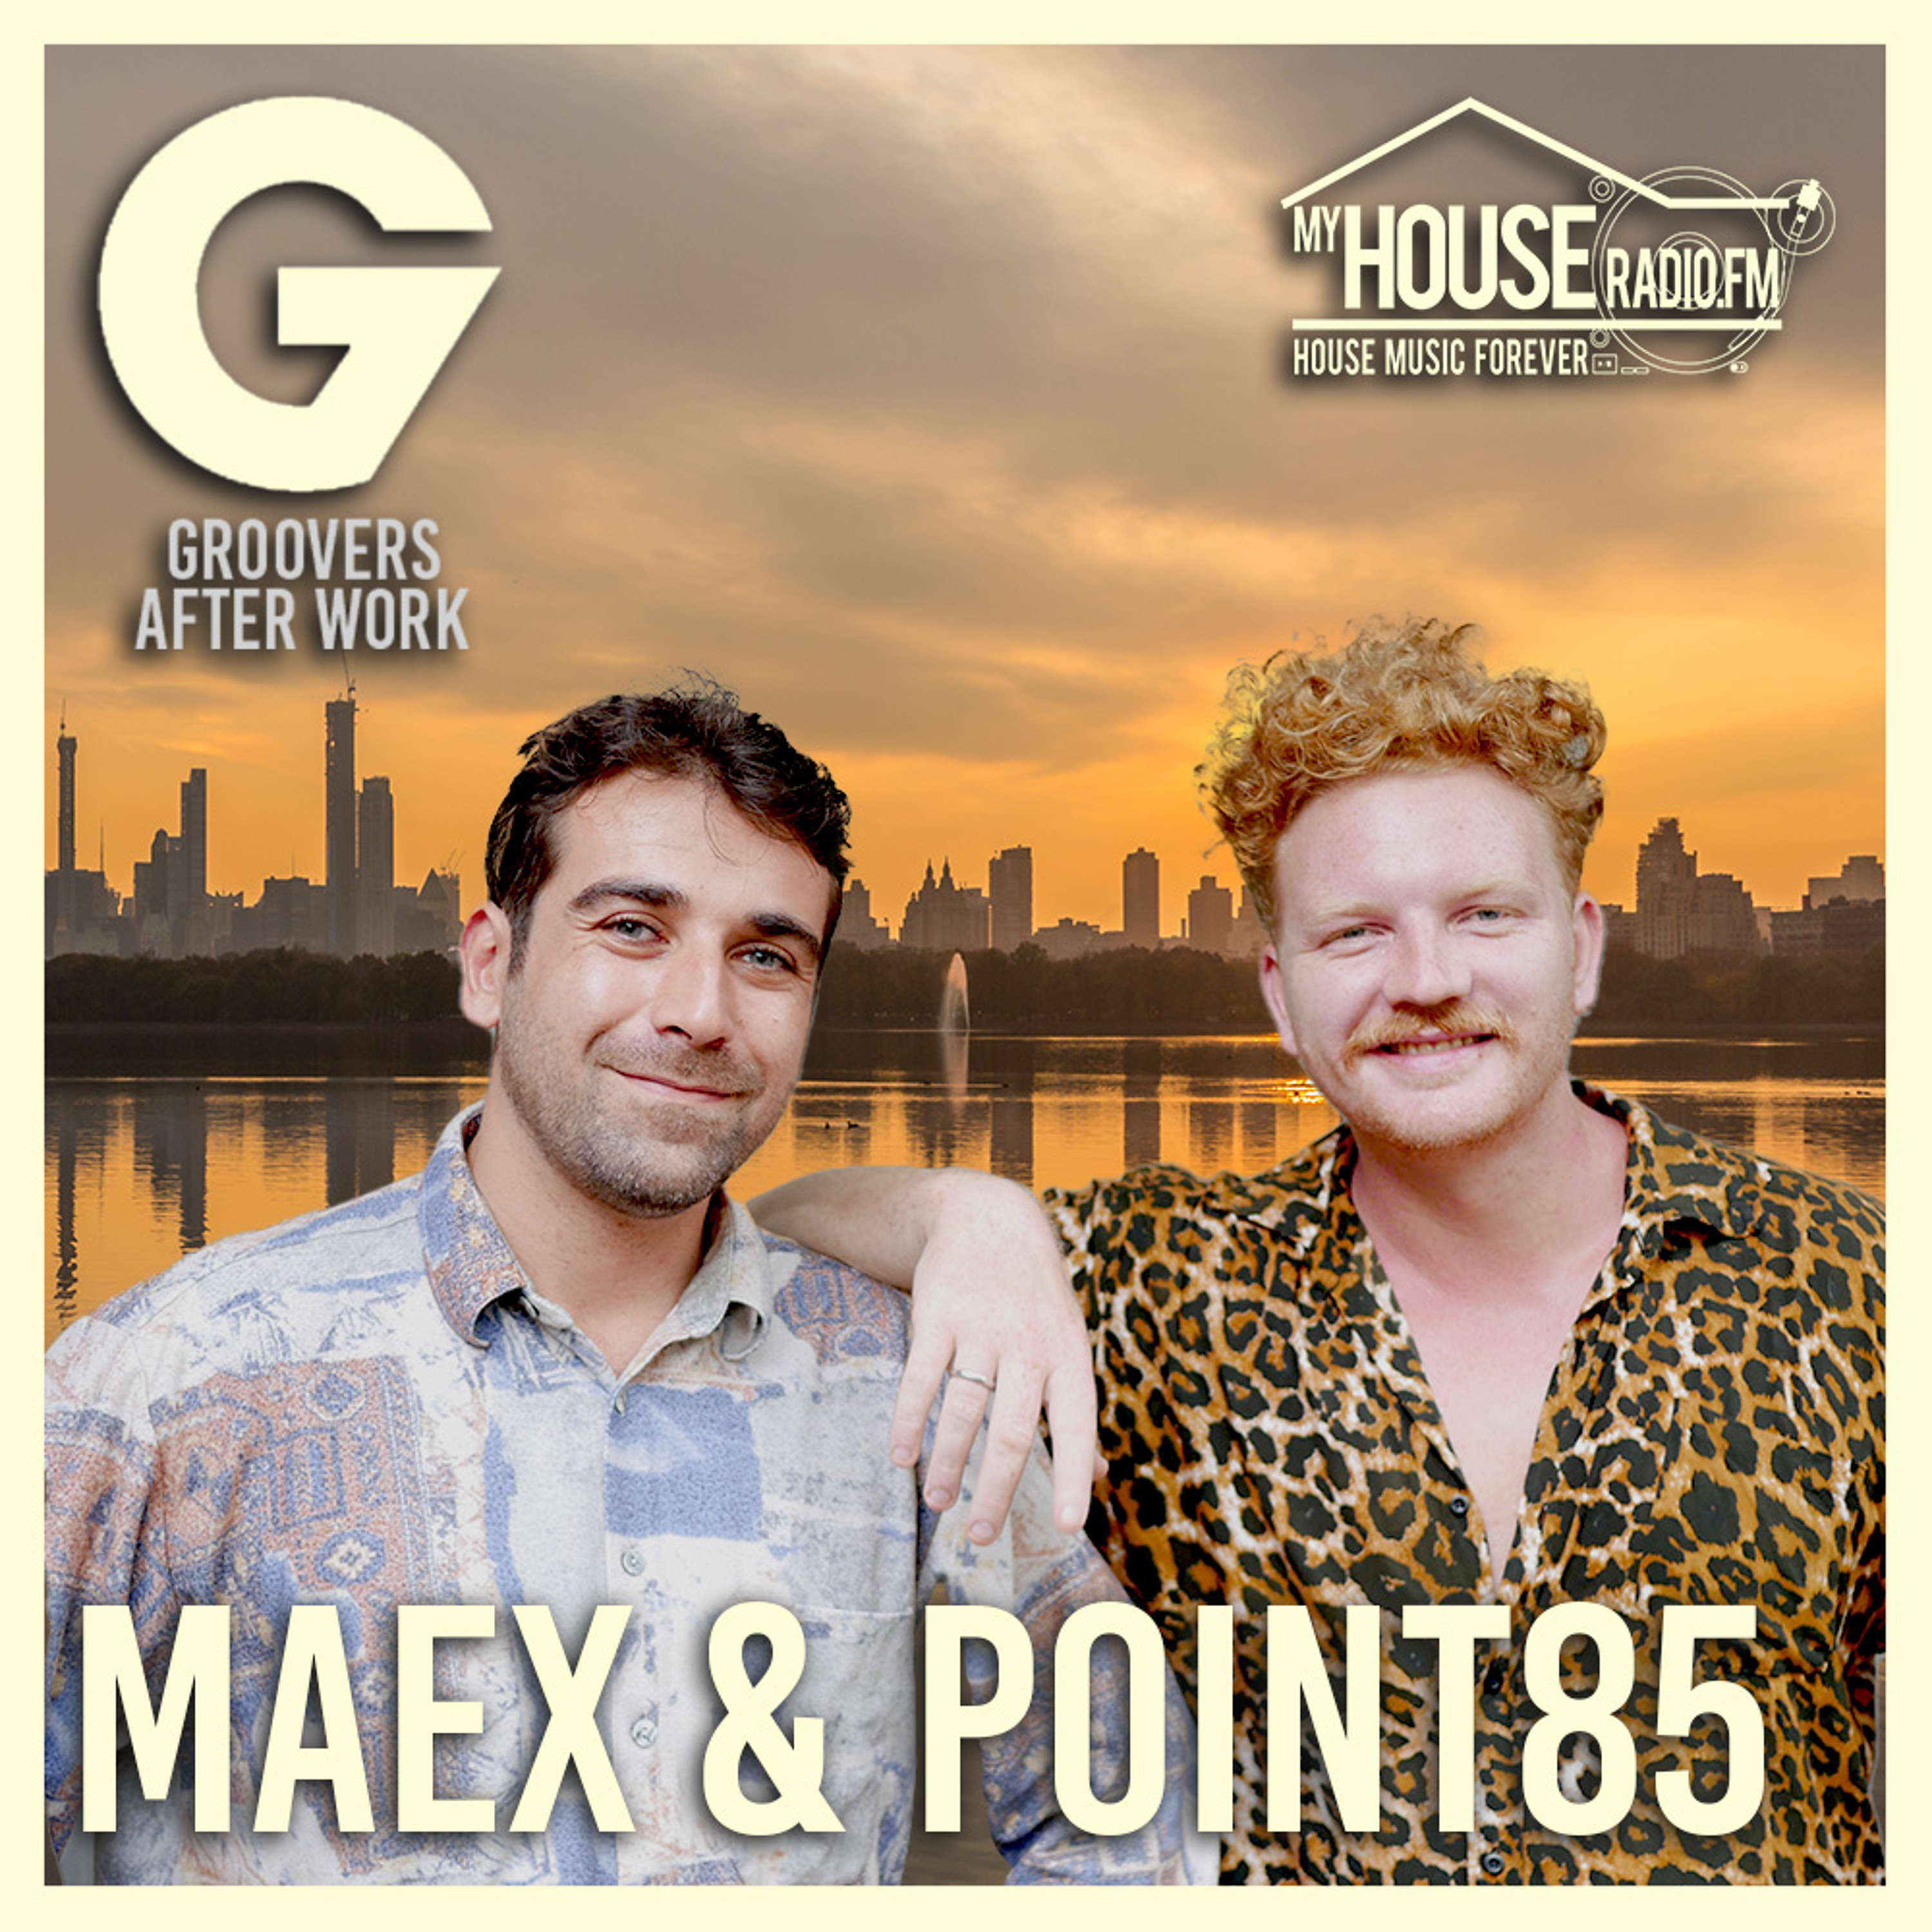 23#12-1 After Work On My House Radio By Maex & Point85